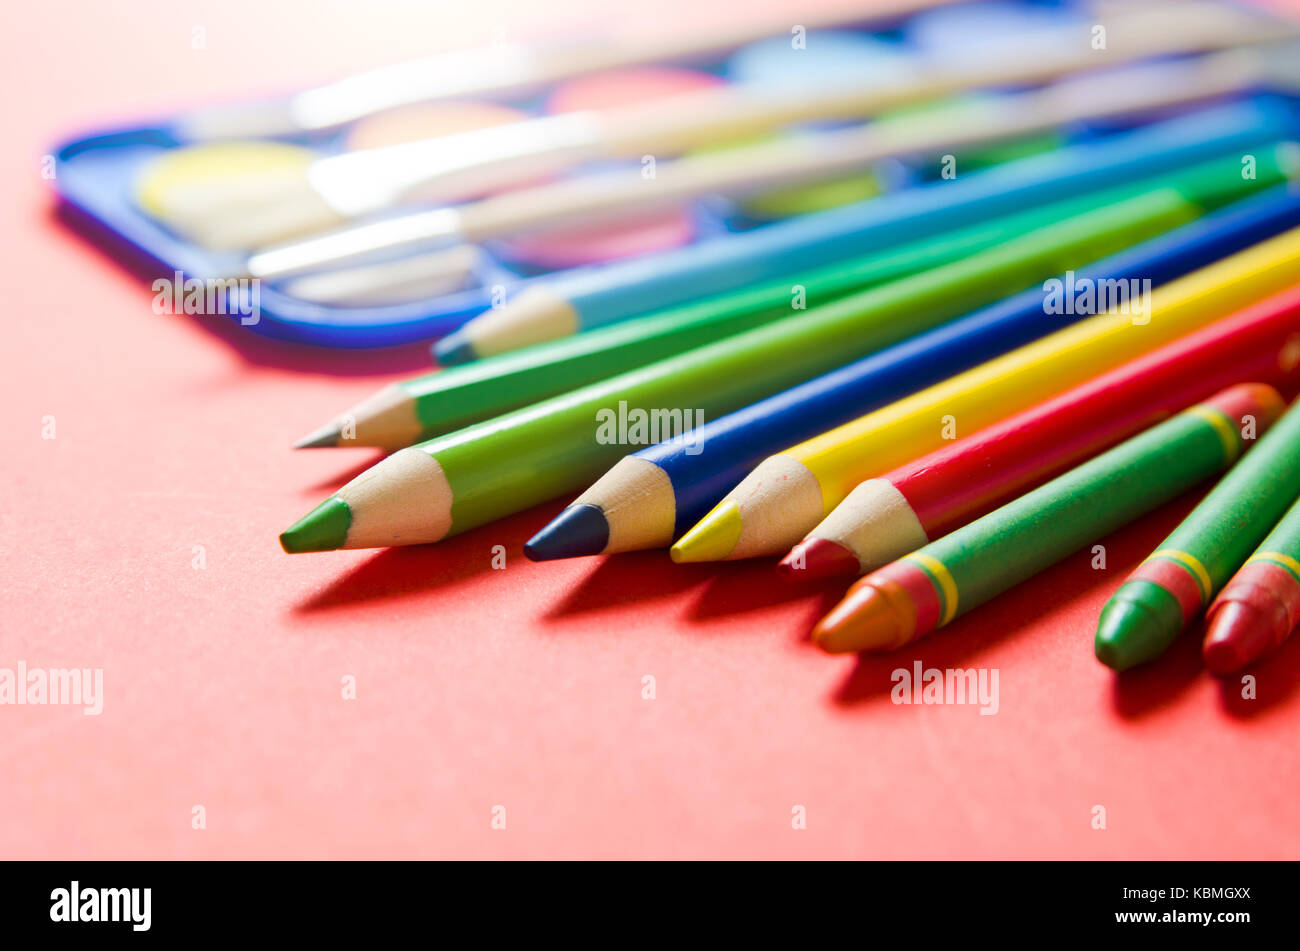 Back to school concept with stationery and school supplies. school back homework education tools wooden stationery concept Stock Photo